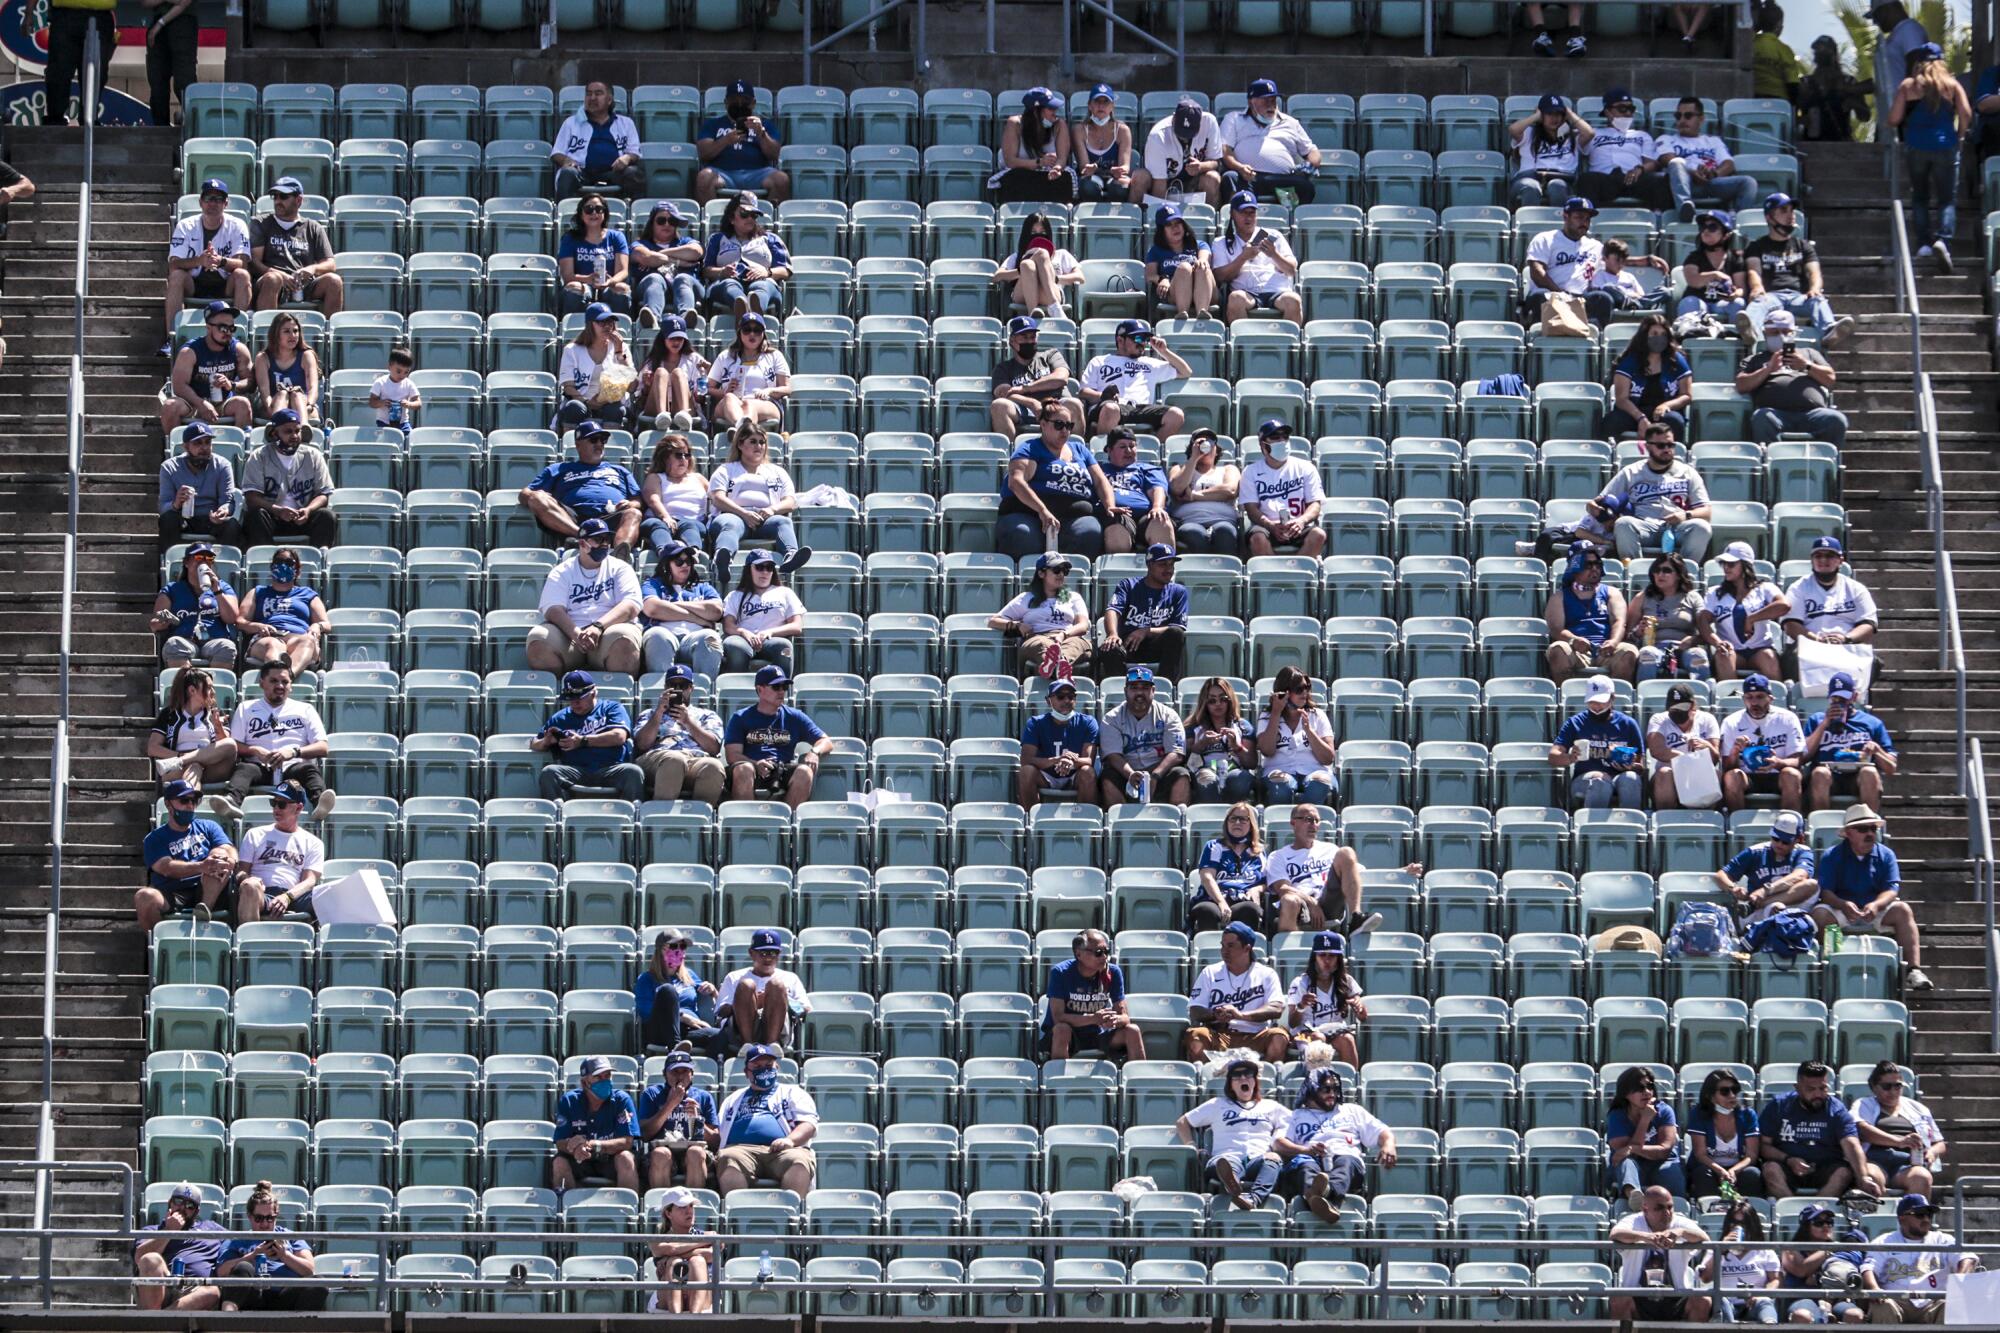 Fans are socially distanced in the upper deck at the Dodgers' home opener at Dodger Stadium.